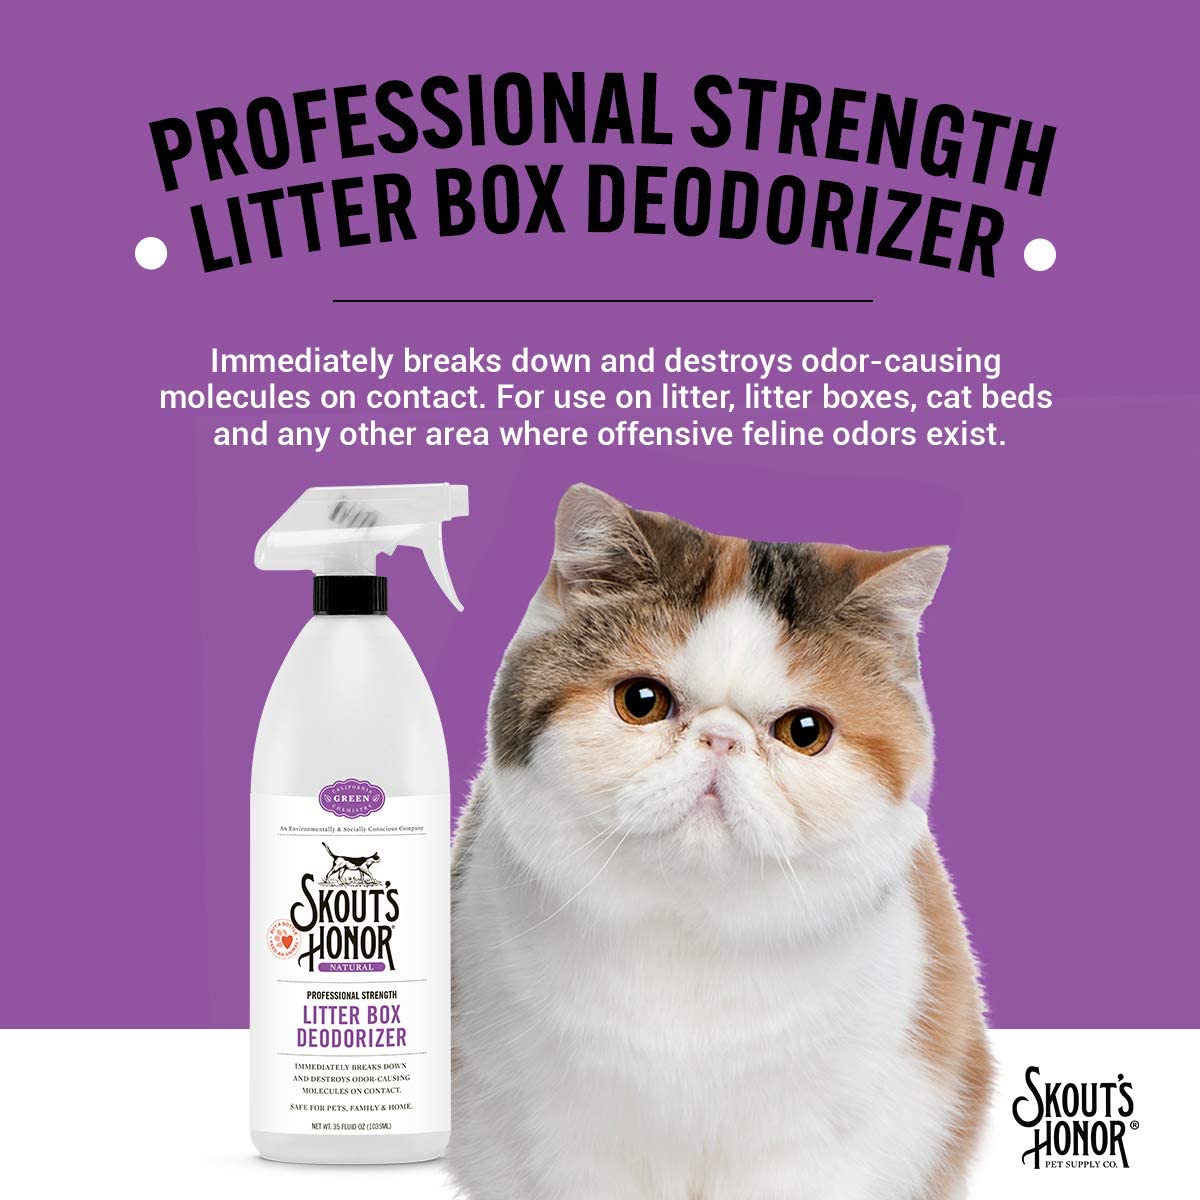 Skout's Honor Professional Strength All-Natural Cat Litter Box Deodorizer - 1035 ml - Heads Up For Tails